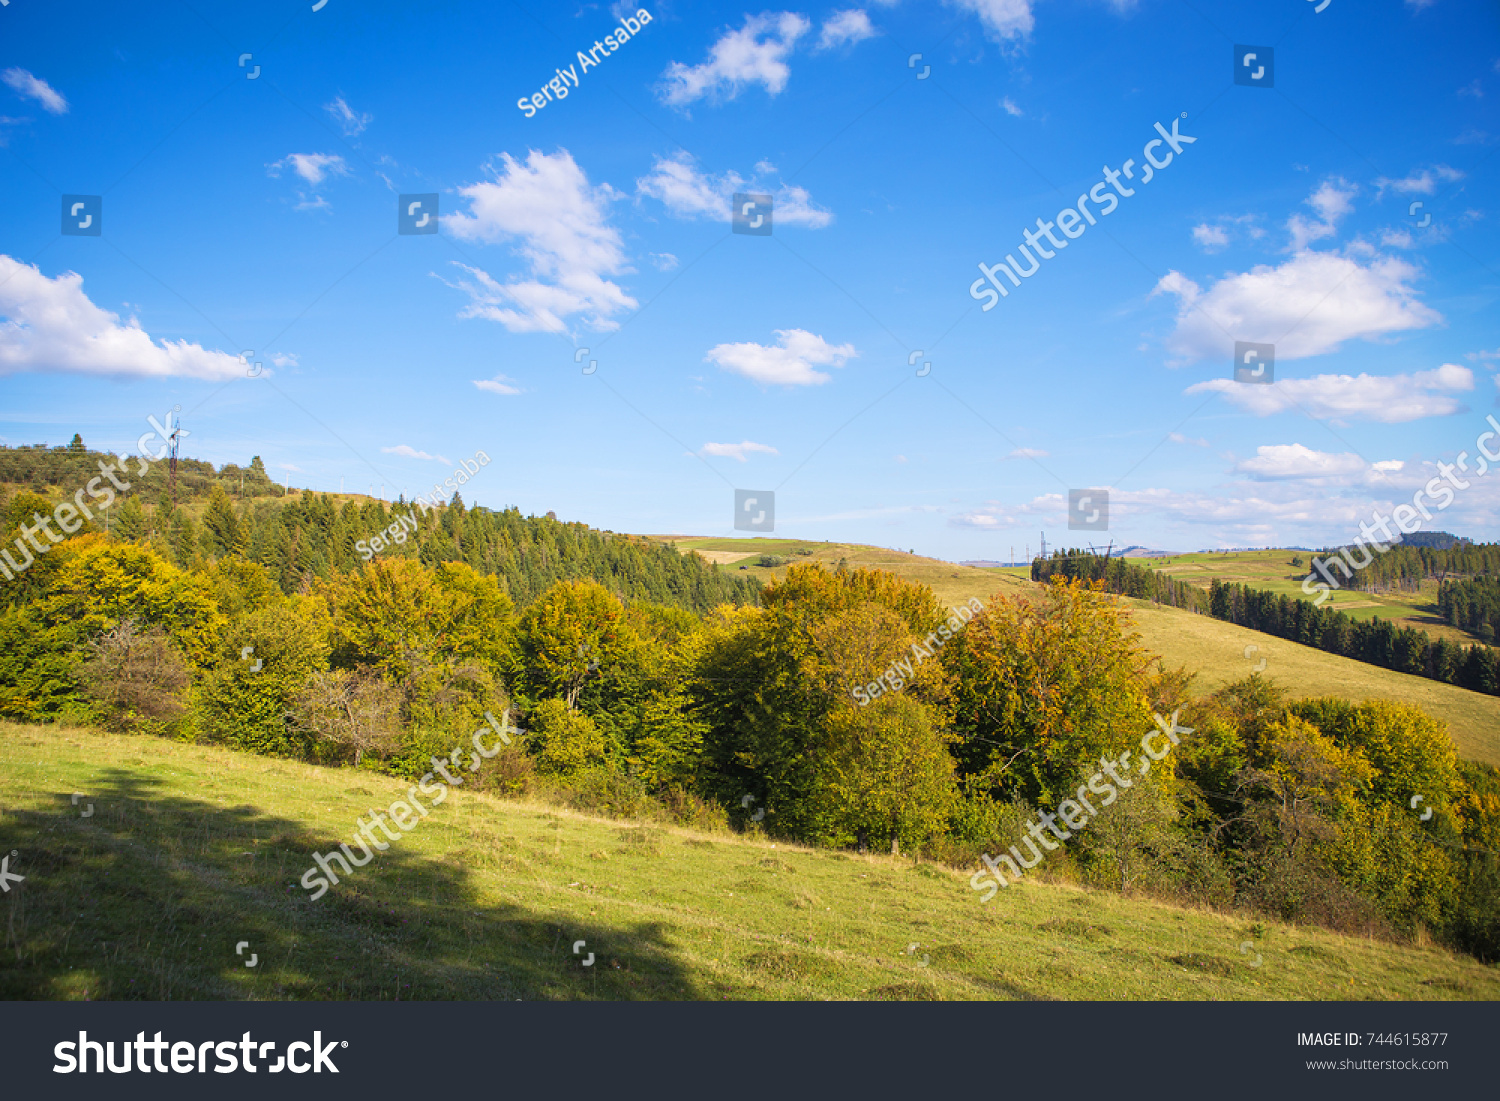 Abstract mountainside with trees. The Carpathian Mountains. Ukraine. #744615877